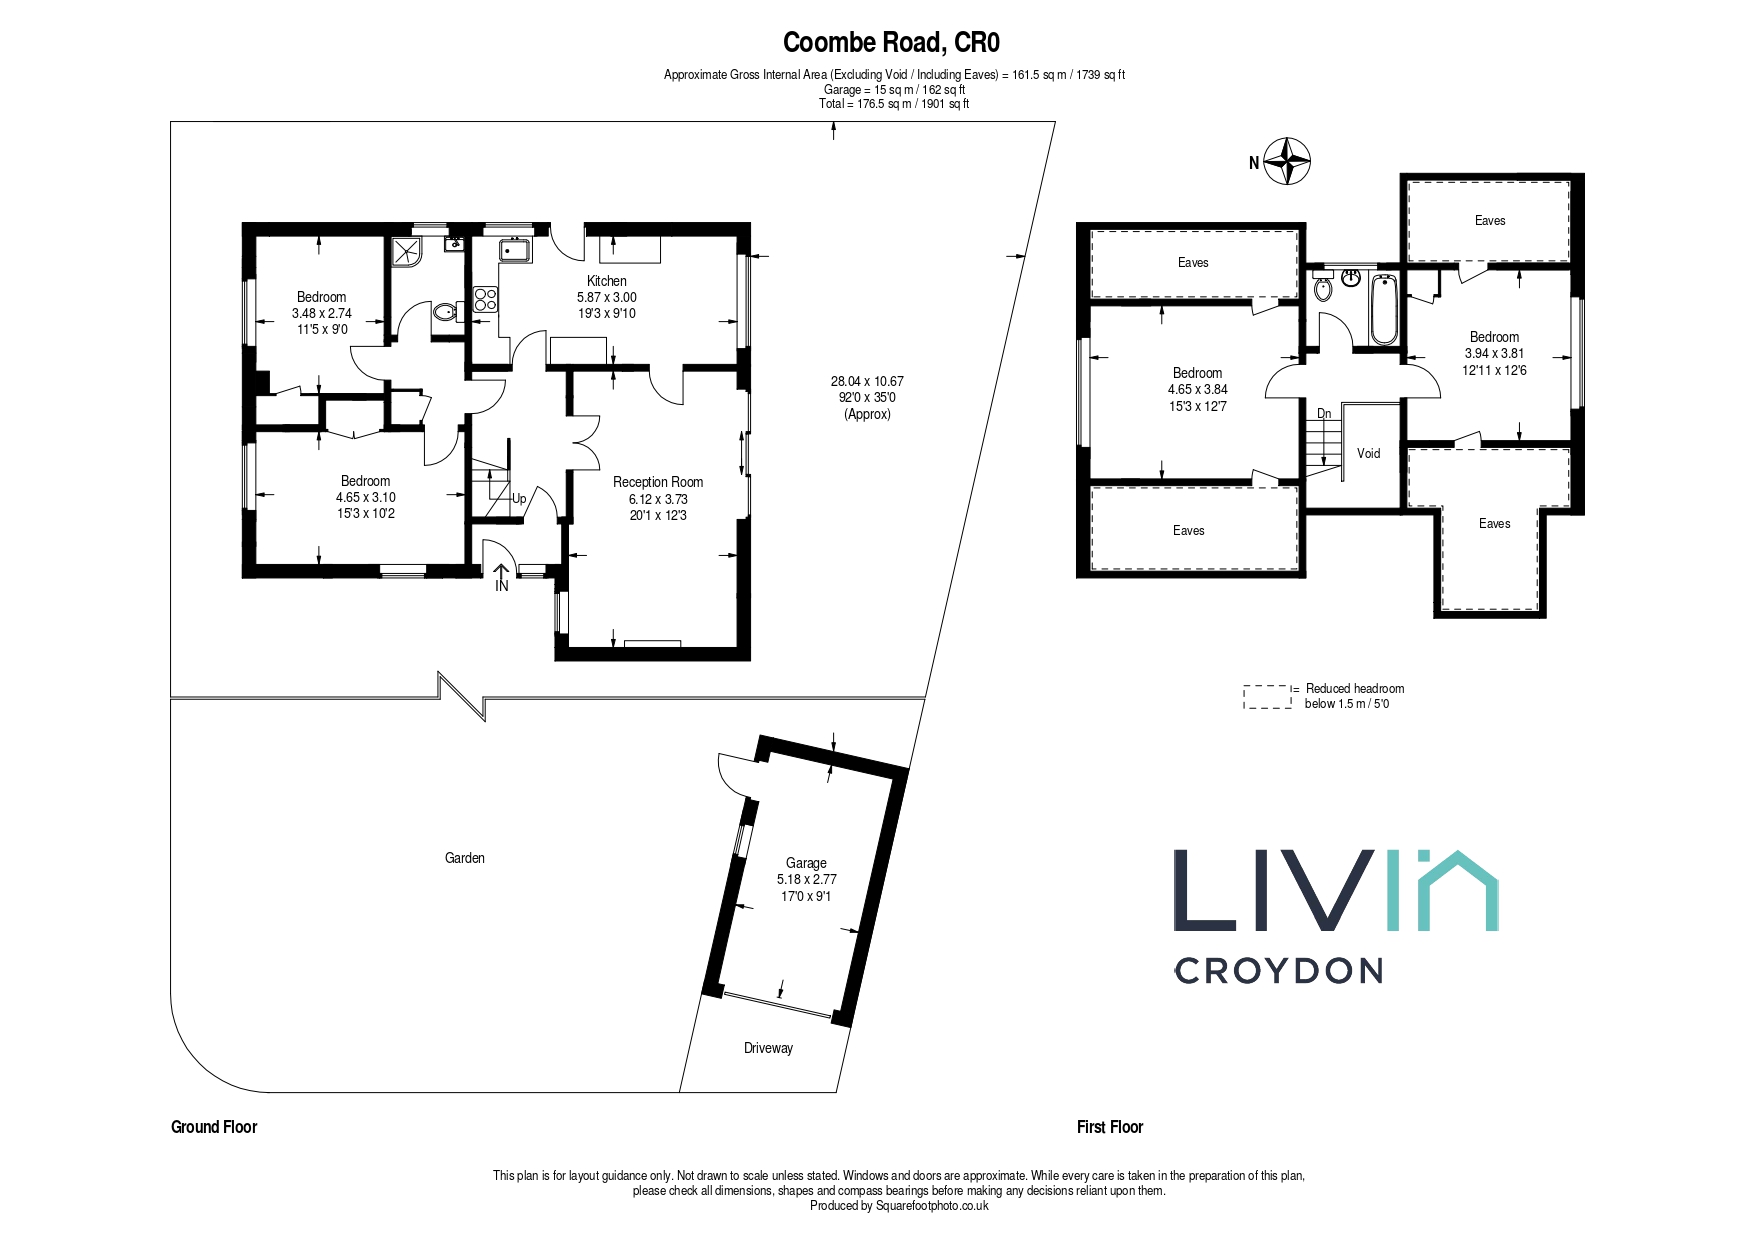 4 bed detached house for sale in Coombe Road, Croydon - Property floorplan